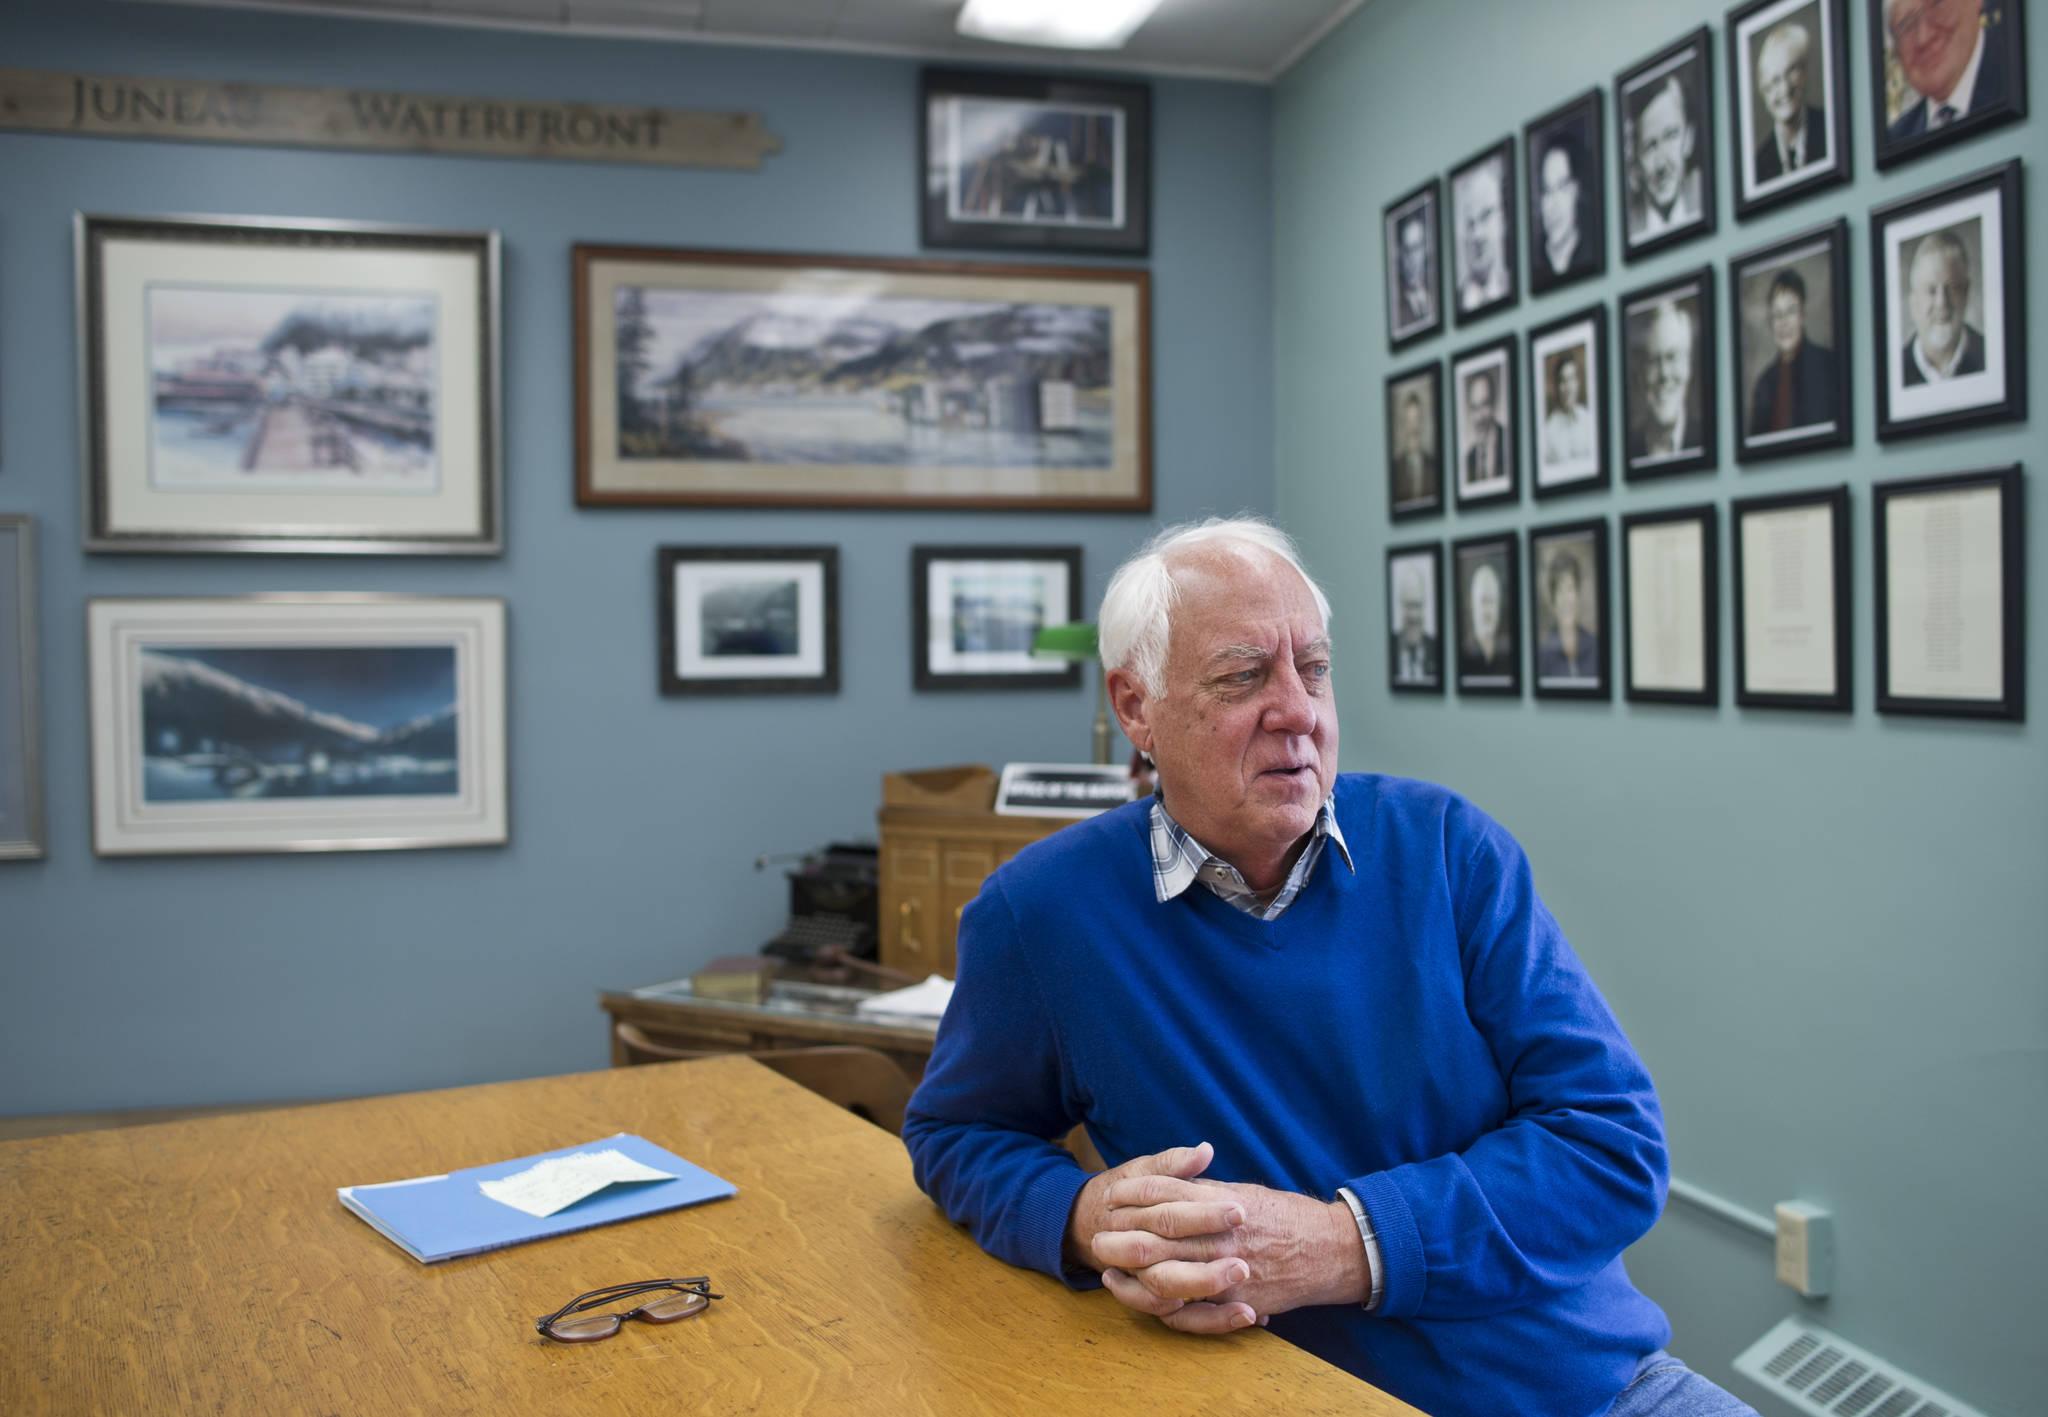 Mayor Ken Koelsch speaks about his first year as mayor from his City Hall office on Thursday, March 30, 2017. (Michael Penn | Juneau Empire)